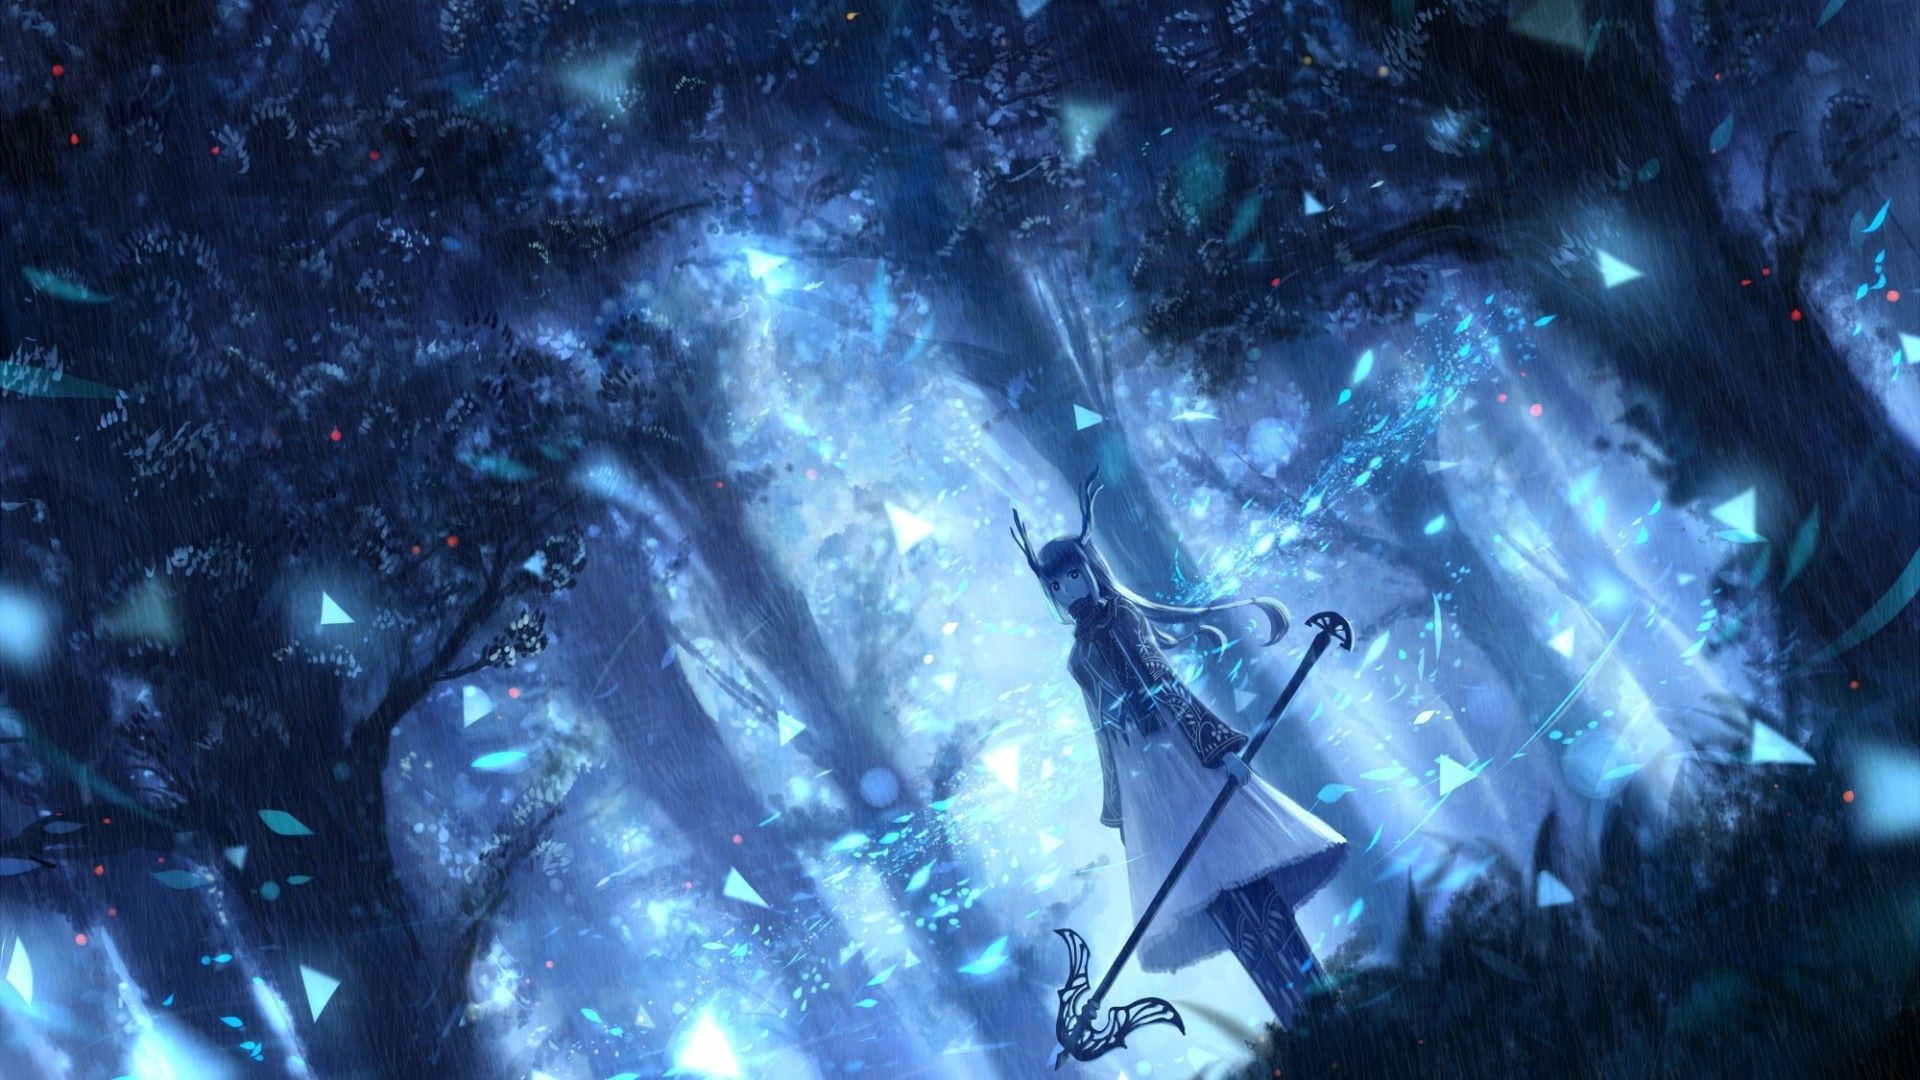 Download 1920x1080 Anime Girl, Magical, Staff, Blue Forest